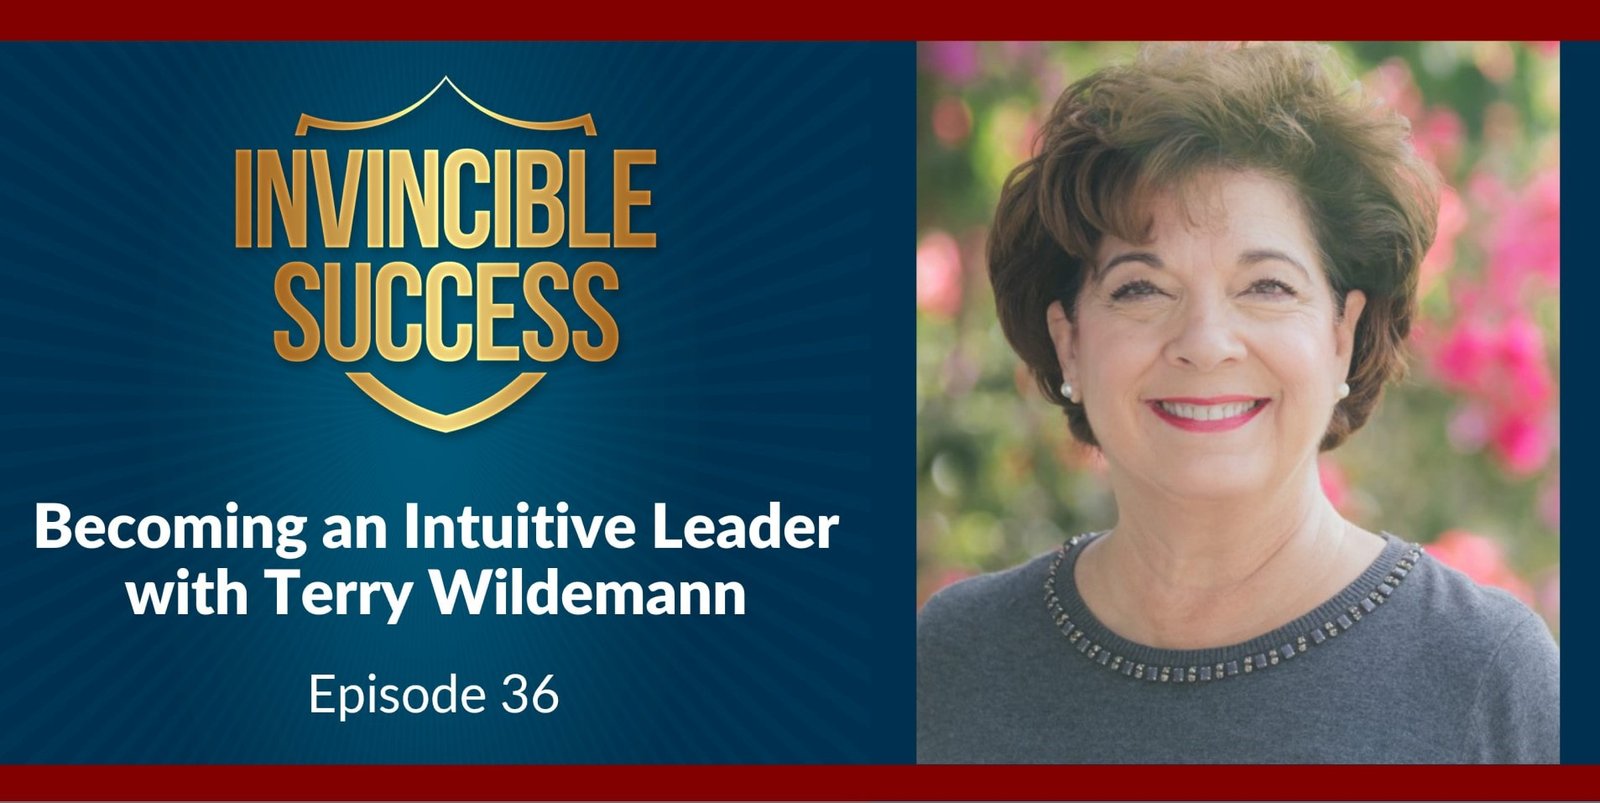 Becoming an Intuitive Leader with Terry Wildemann - Episode 36 - Invincible Success Podcast